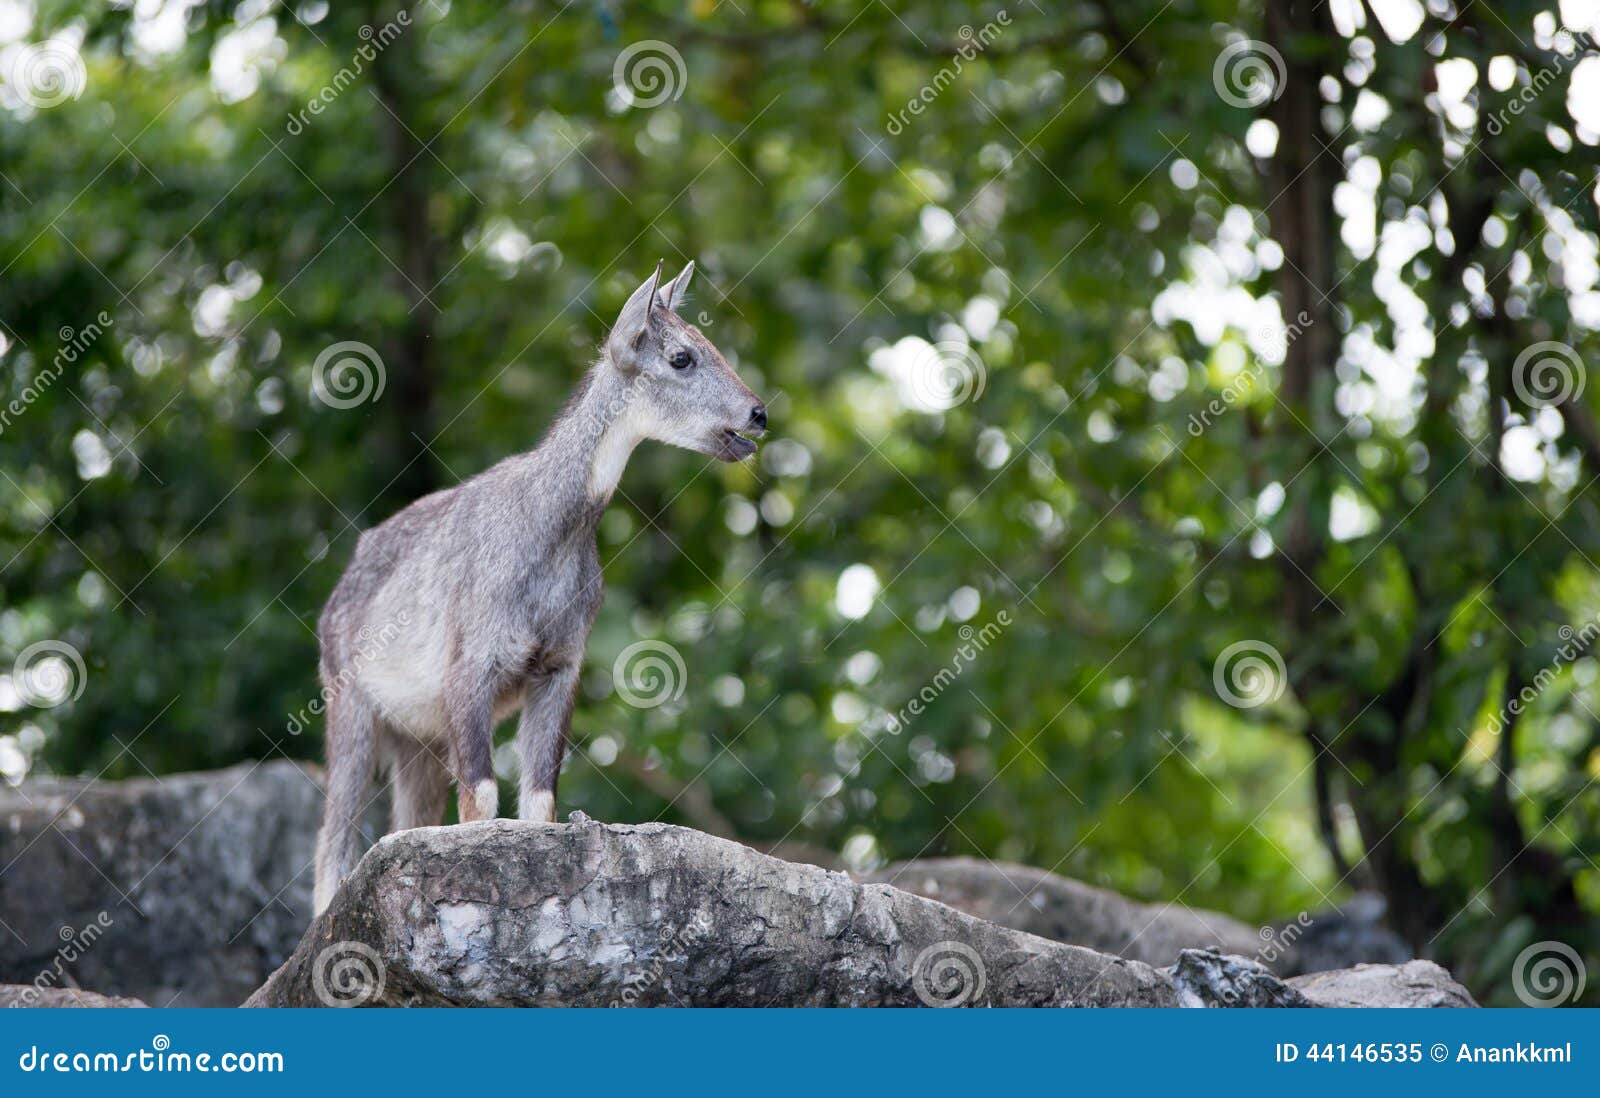 goral standing on the rock